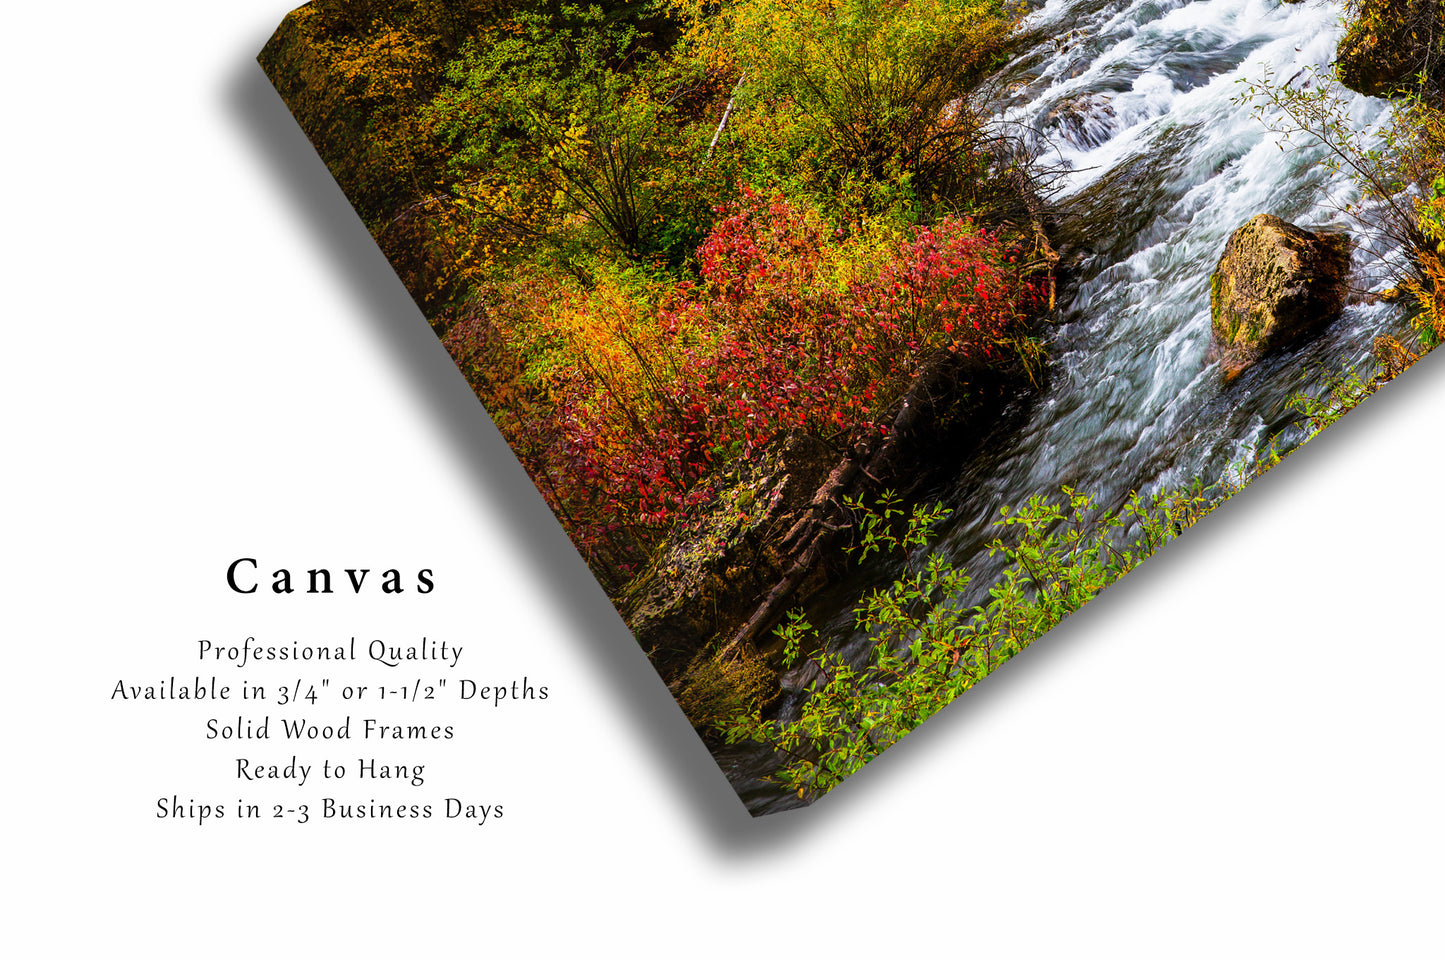 Black Hills Canvas Wall Art - Gallery Wrap of Creek and Fall Foliage on Autumn Day in Spearfish Canyon South Dakota - Western Photo Decor